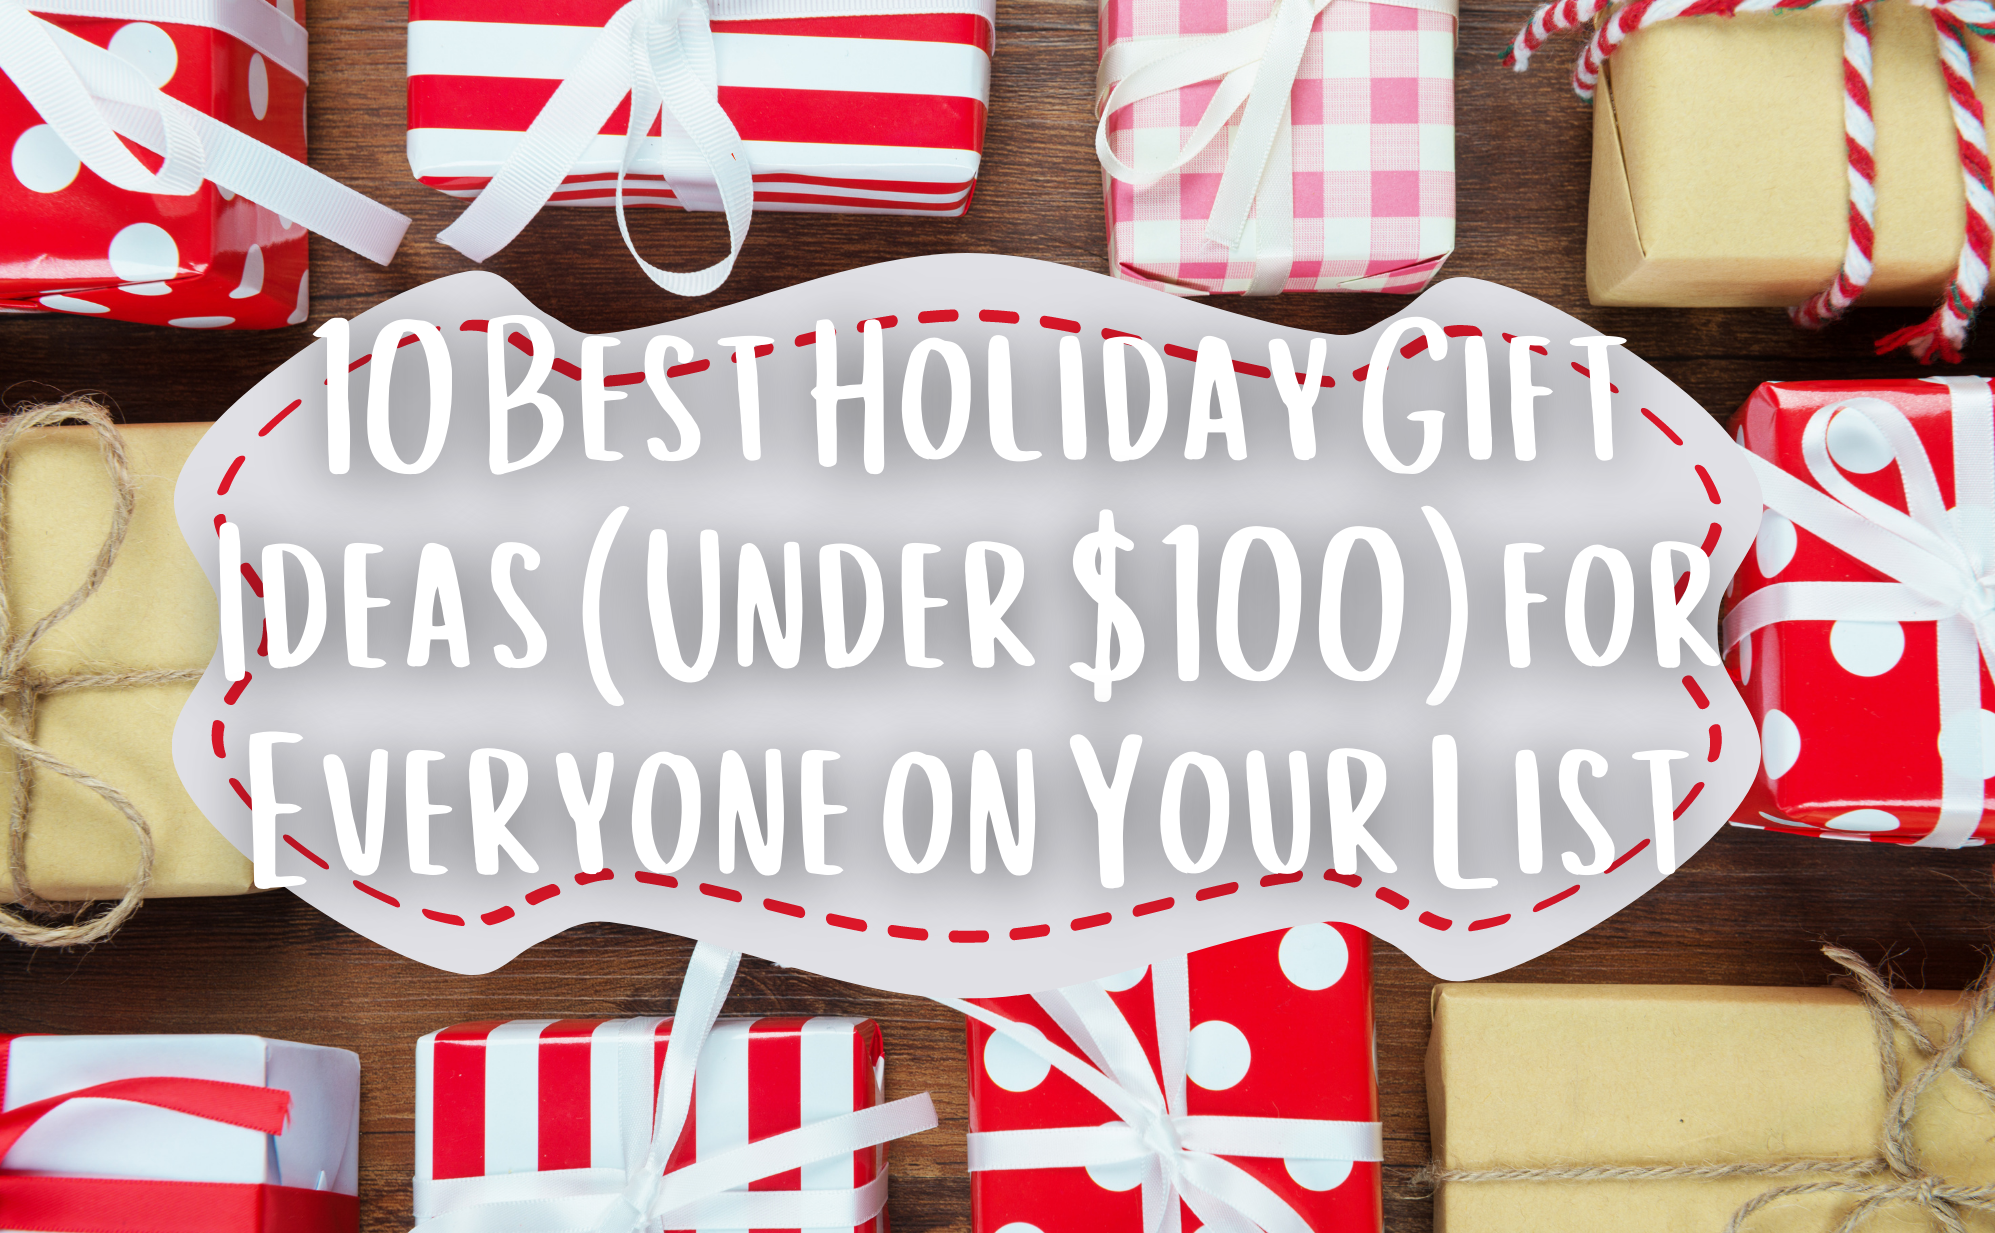 10 Best Holiday Gift Ideas Under $100 for Everyone on Your List